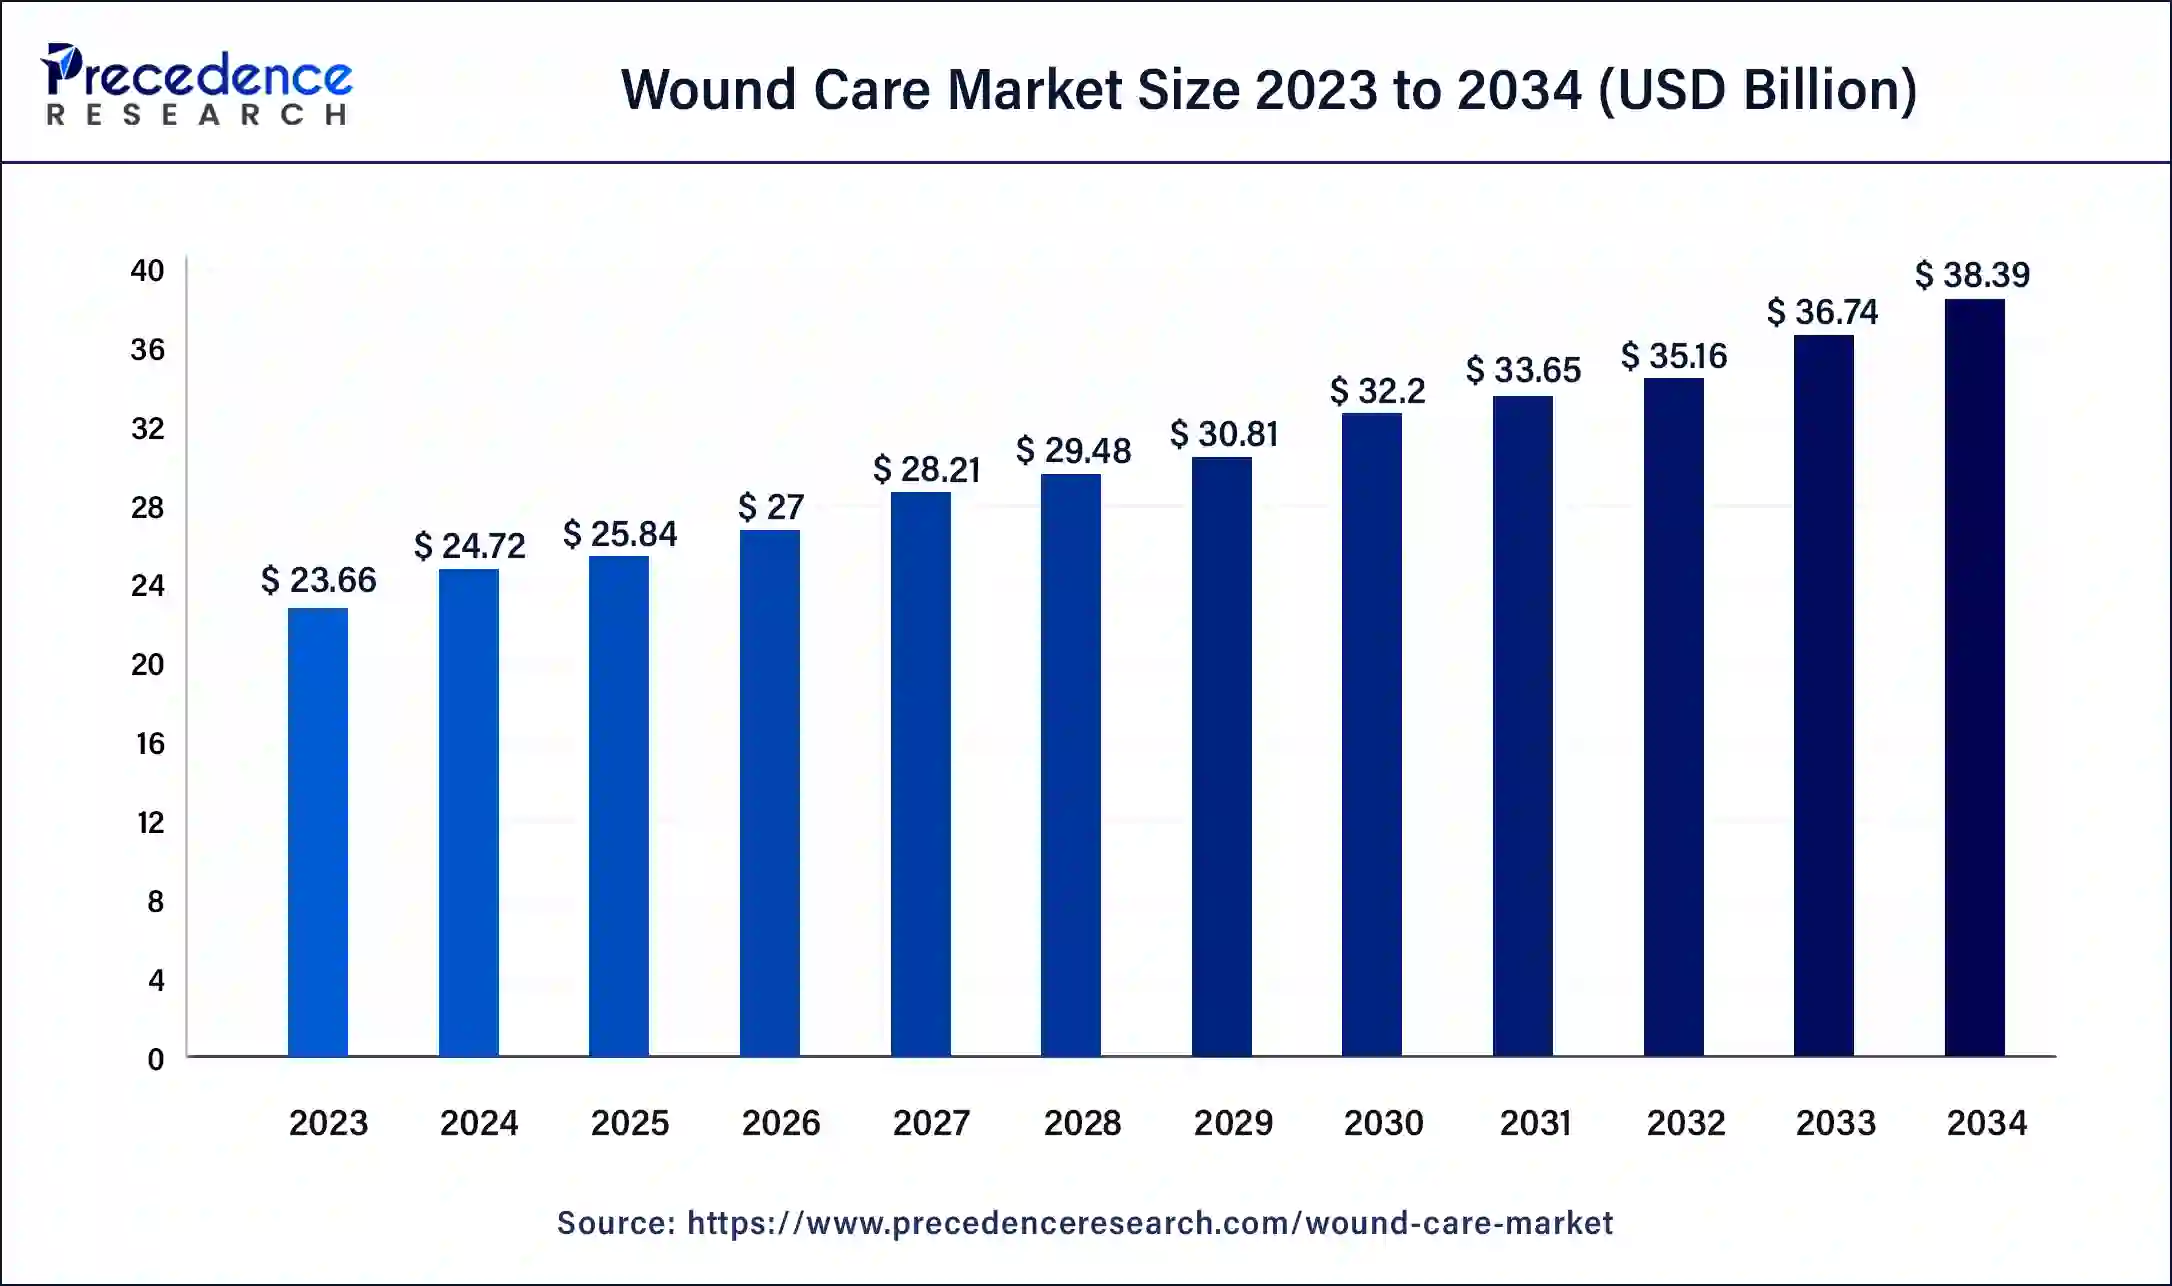 Wound Care Market Size 2024 to 2034